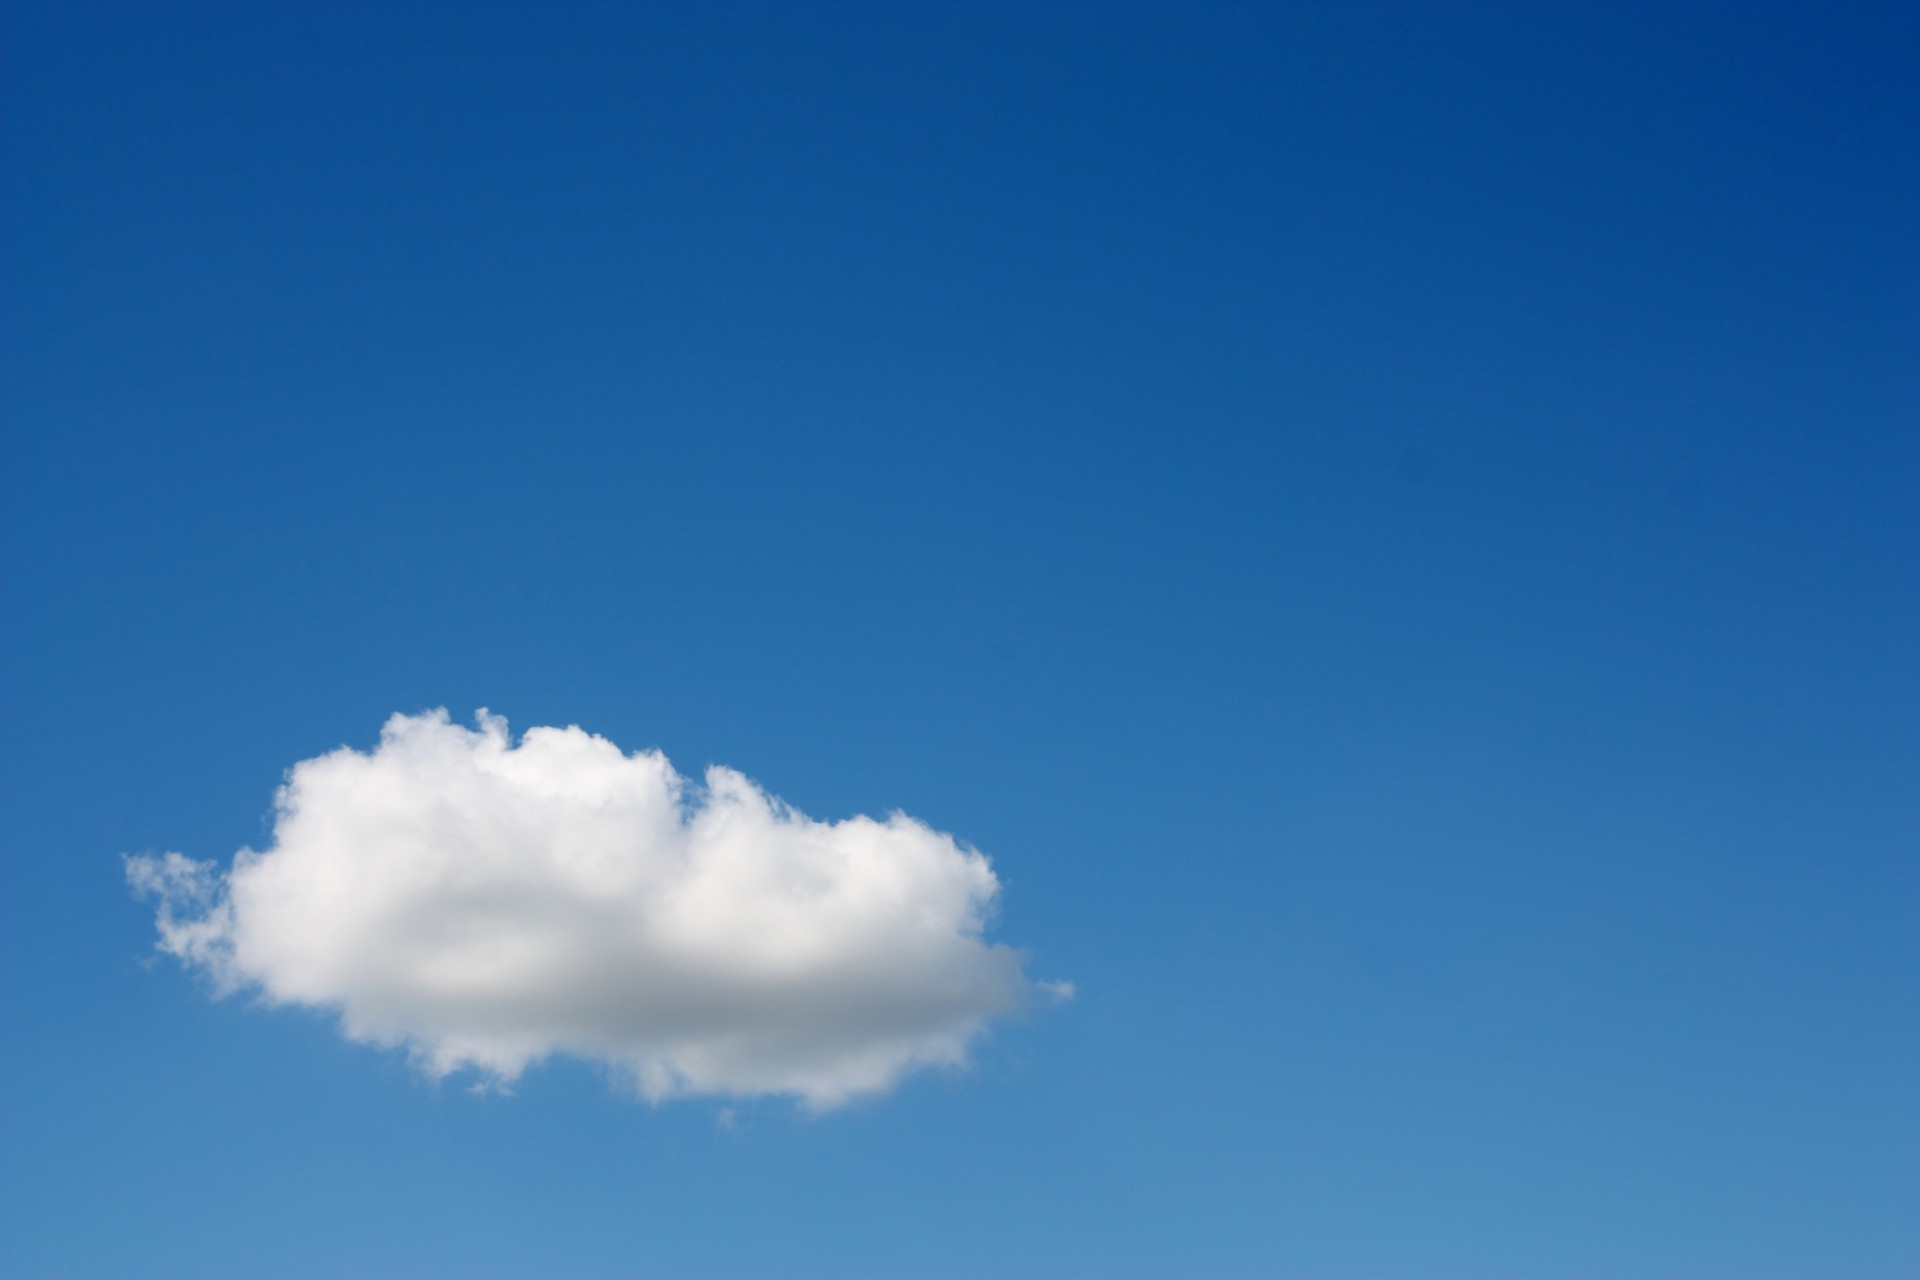 One white cloud in the blue sky - Aegis Business Technologies, Inc.